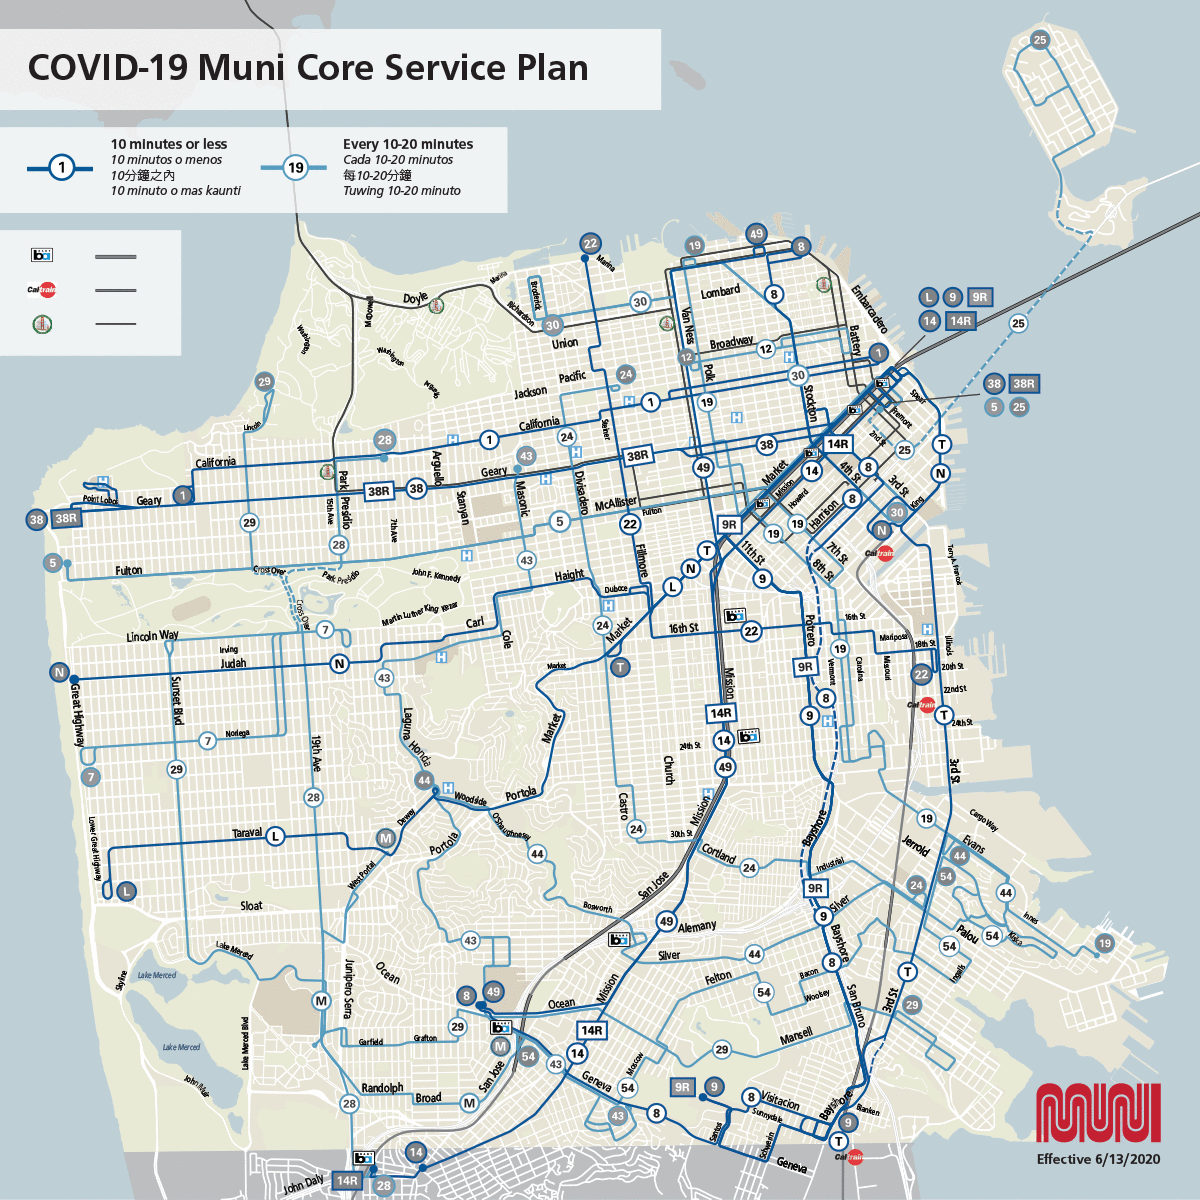 COVID-19 Core Service map with new service as of June 13, 2020